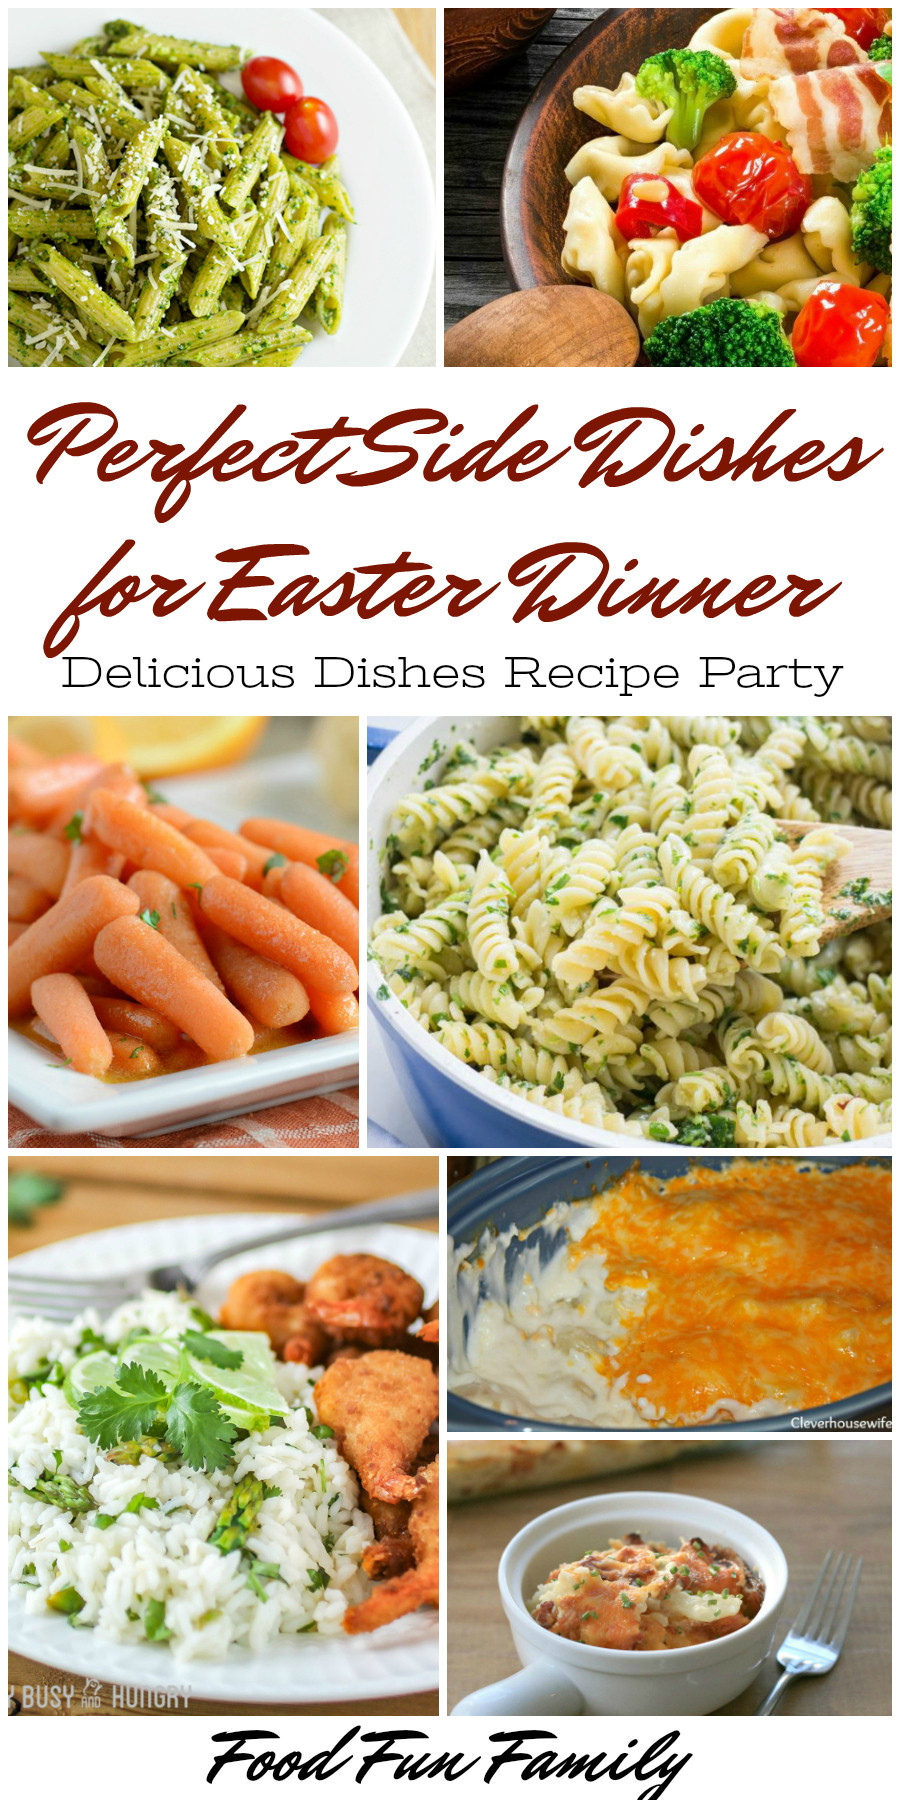 Easter Brunch Side Dishes
 Perfect Side Dishes for Easter Dinner – Delicious Dishes